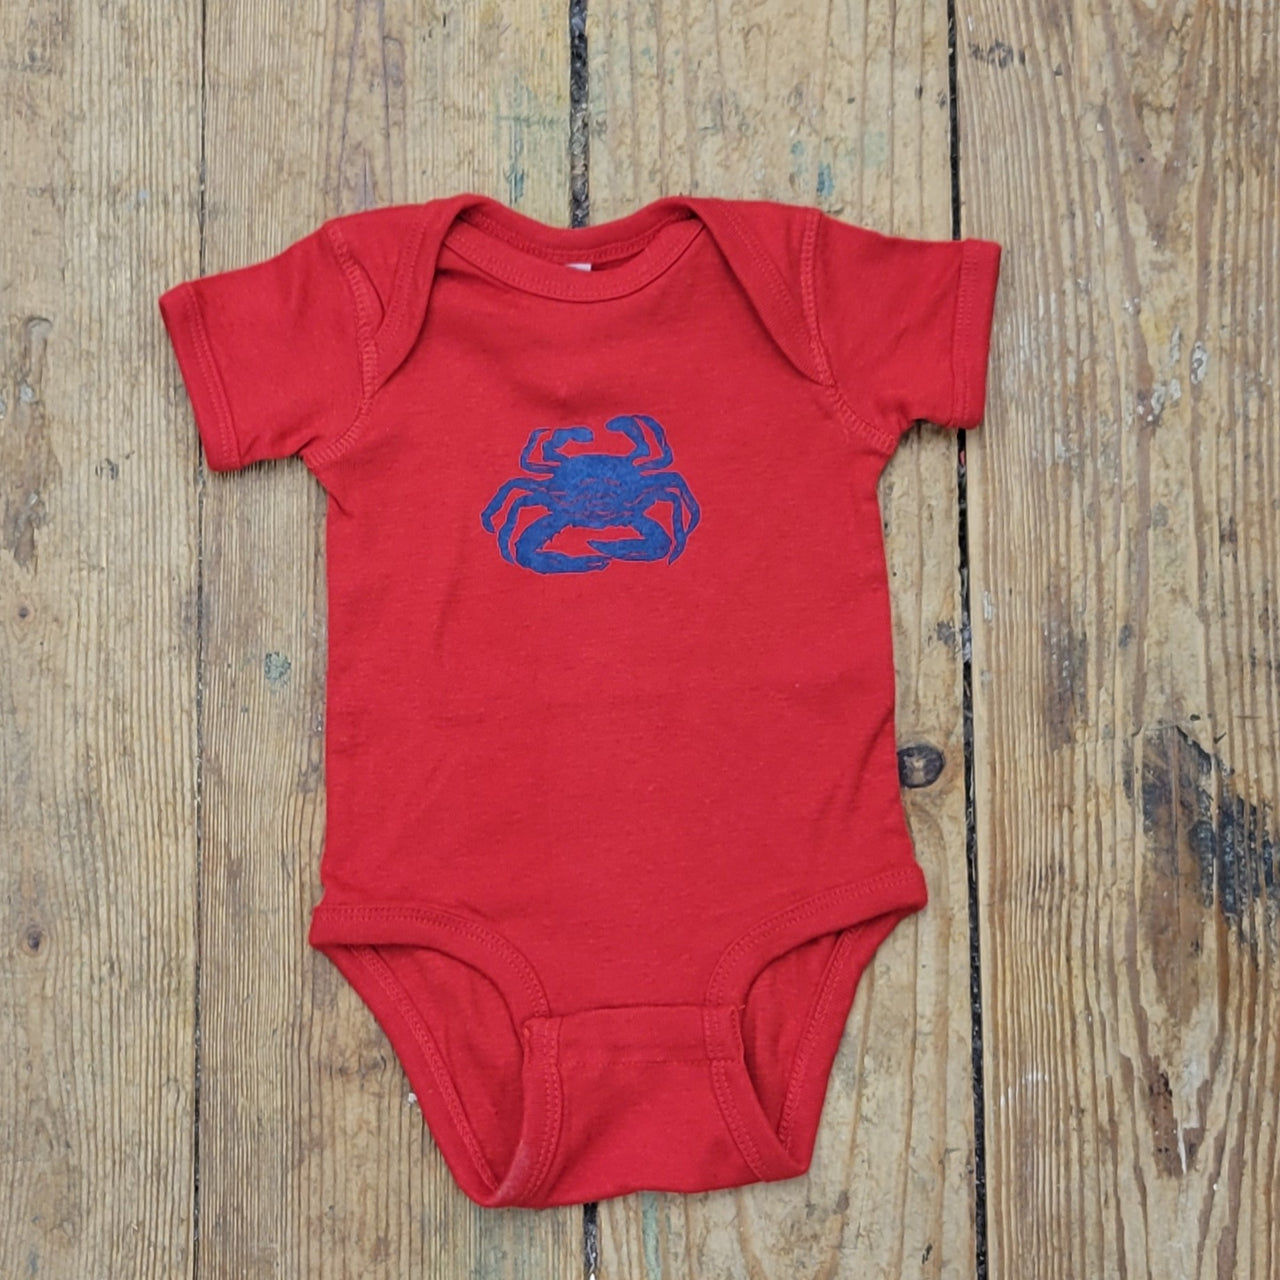 Bright red onesie featuring a 'Crab' design in royal blue ink.